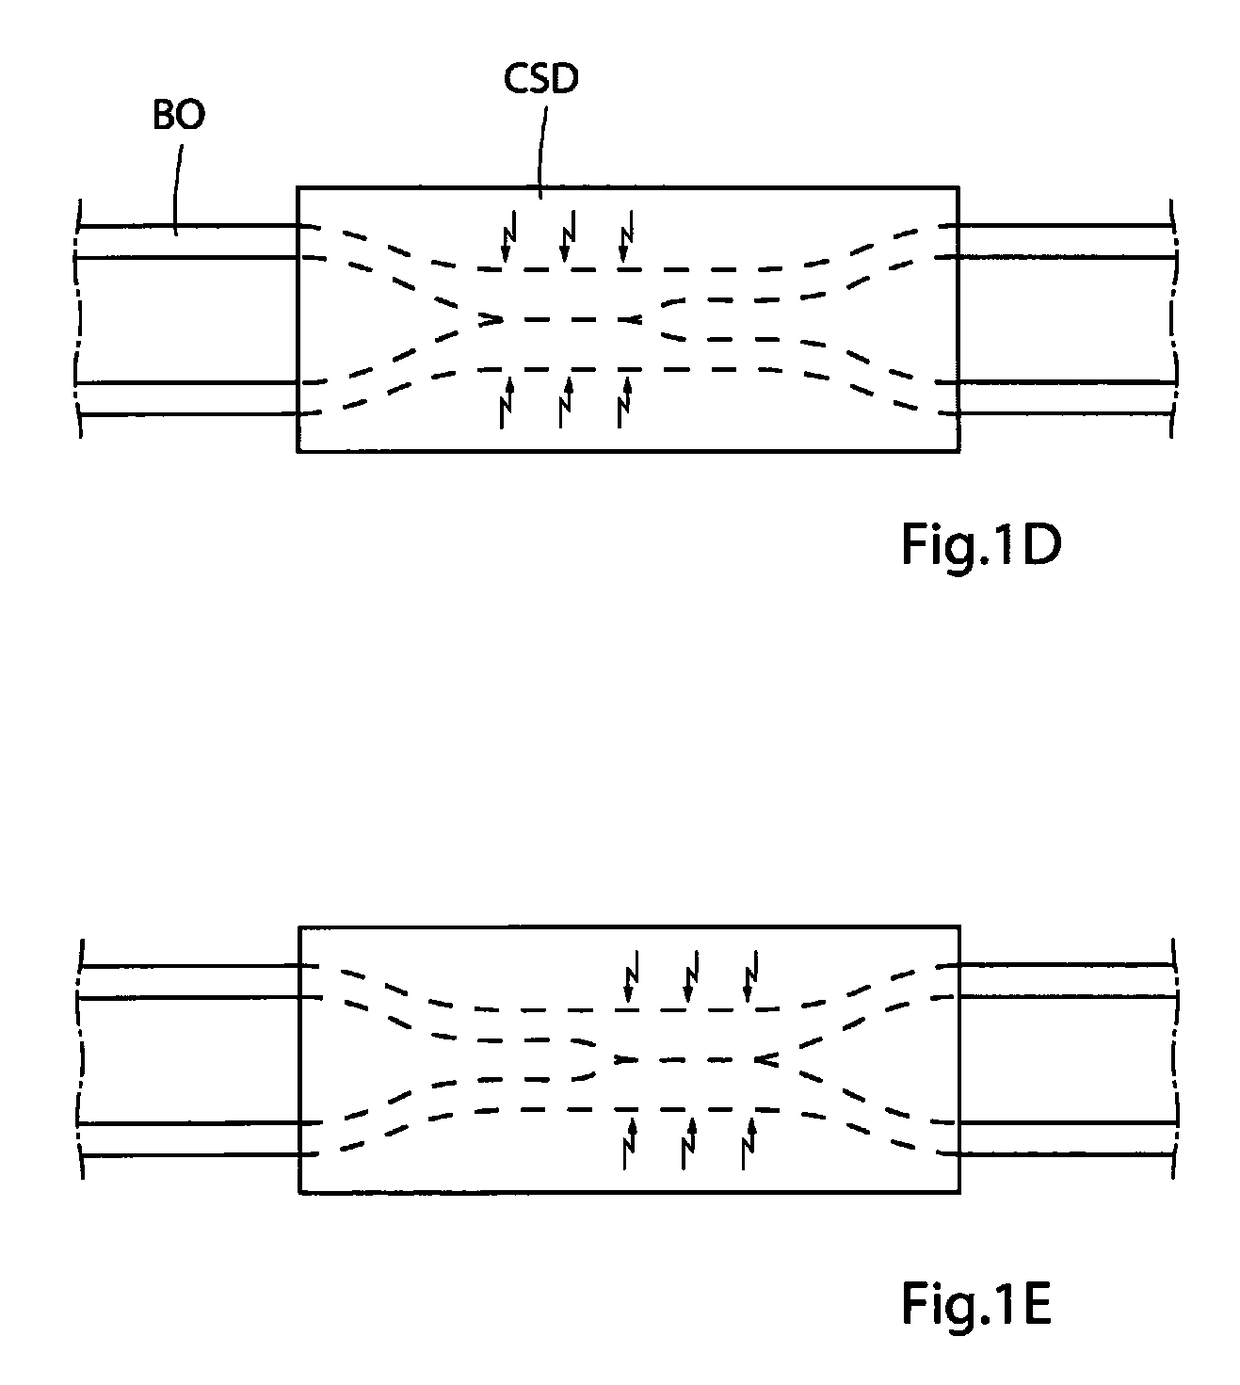 Method for controlling flow in a bodily organ